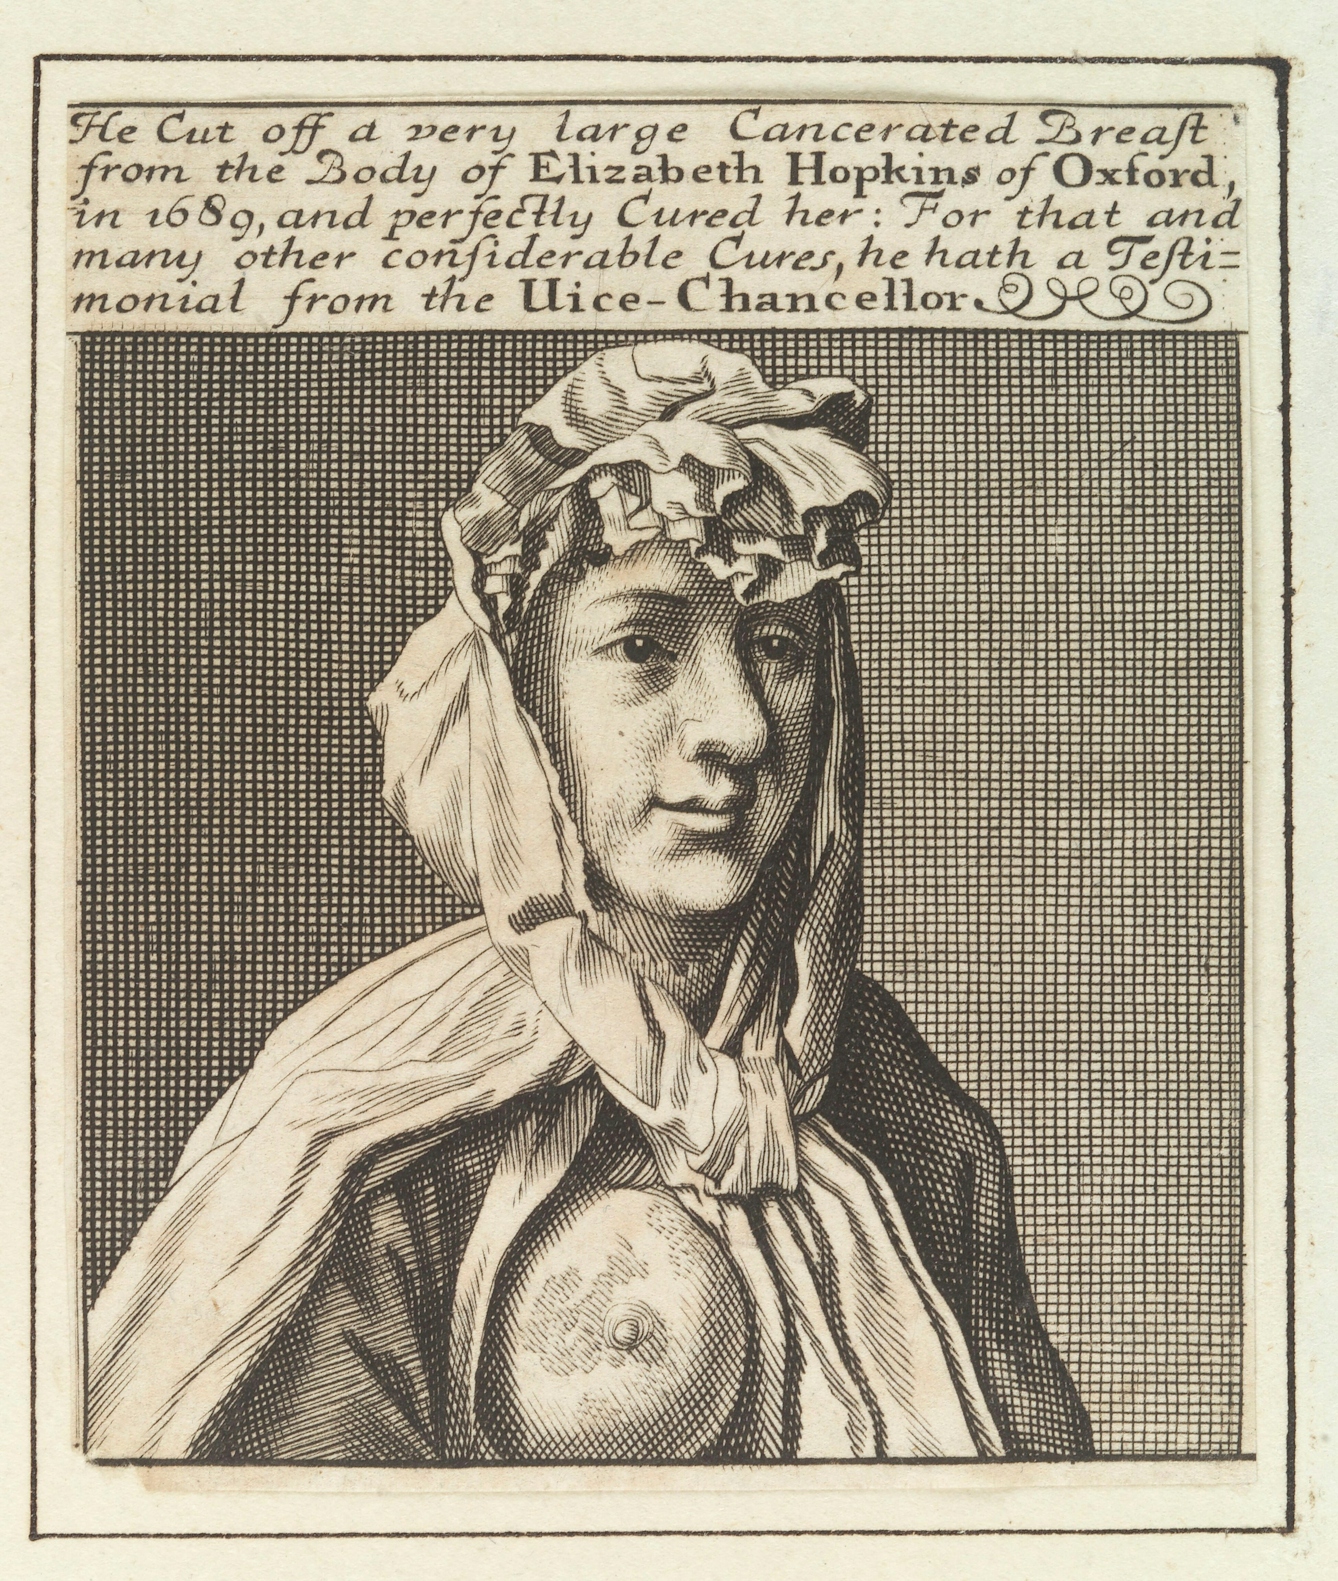 Engraving of a 1700s woman with breast cancer baring her right breast